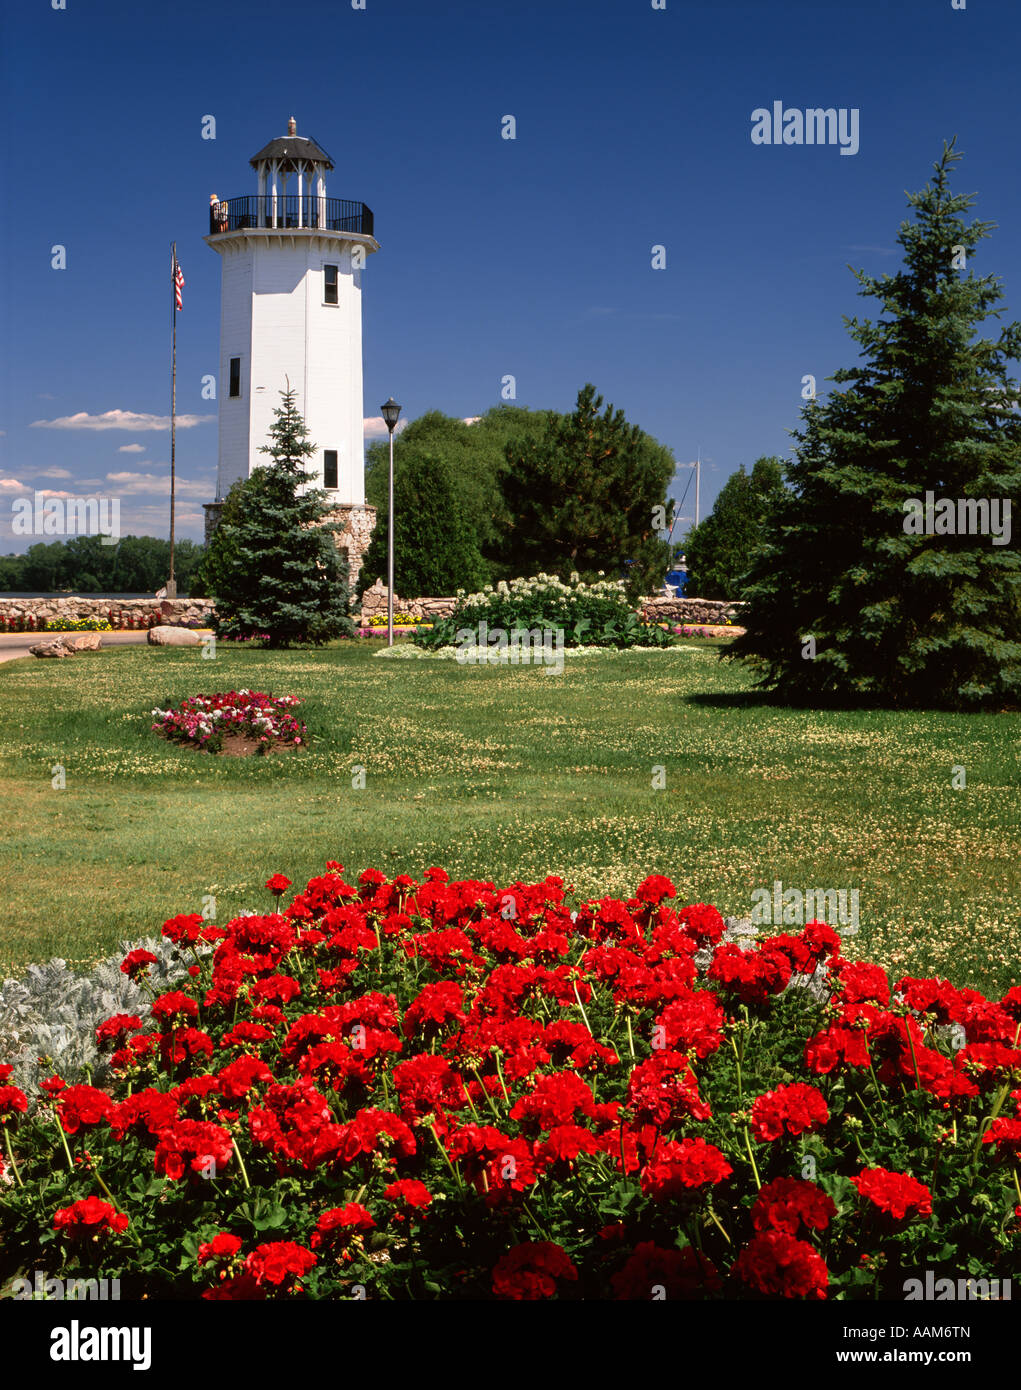 LIGHTHOUSE IN LAKESIDE PARK FOND DU LAC WISCONSIN Stock Photo